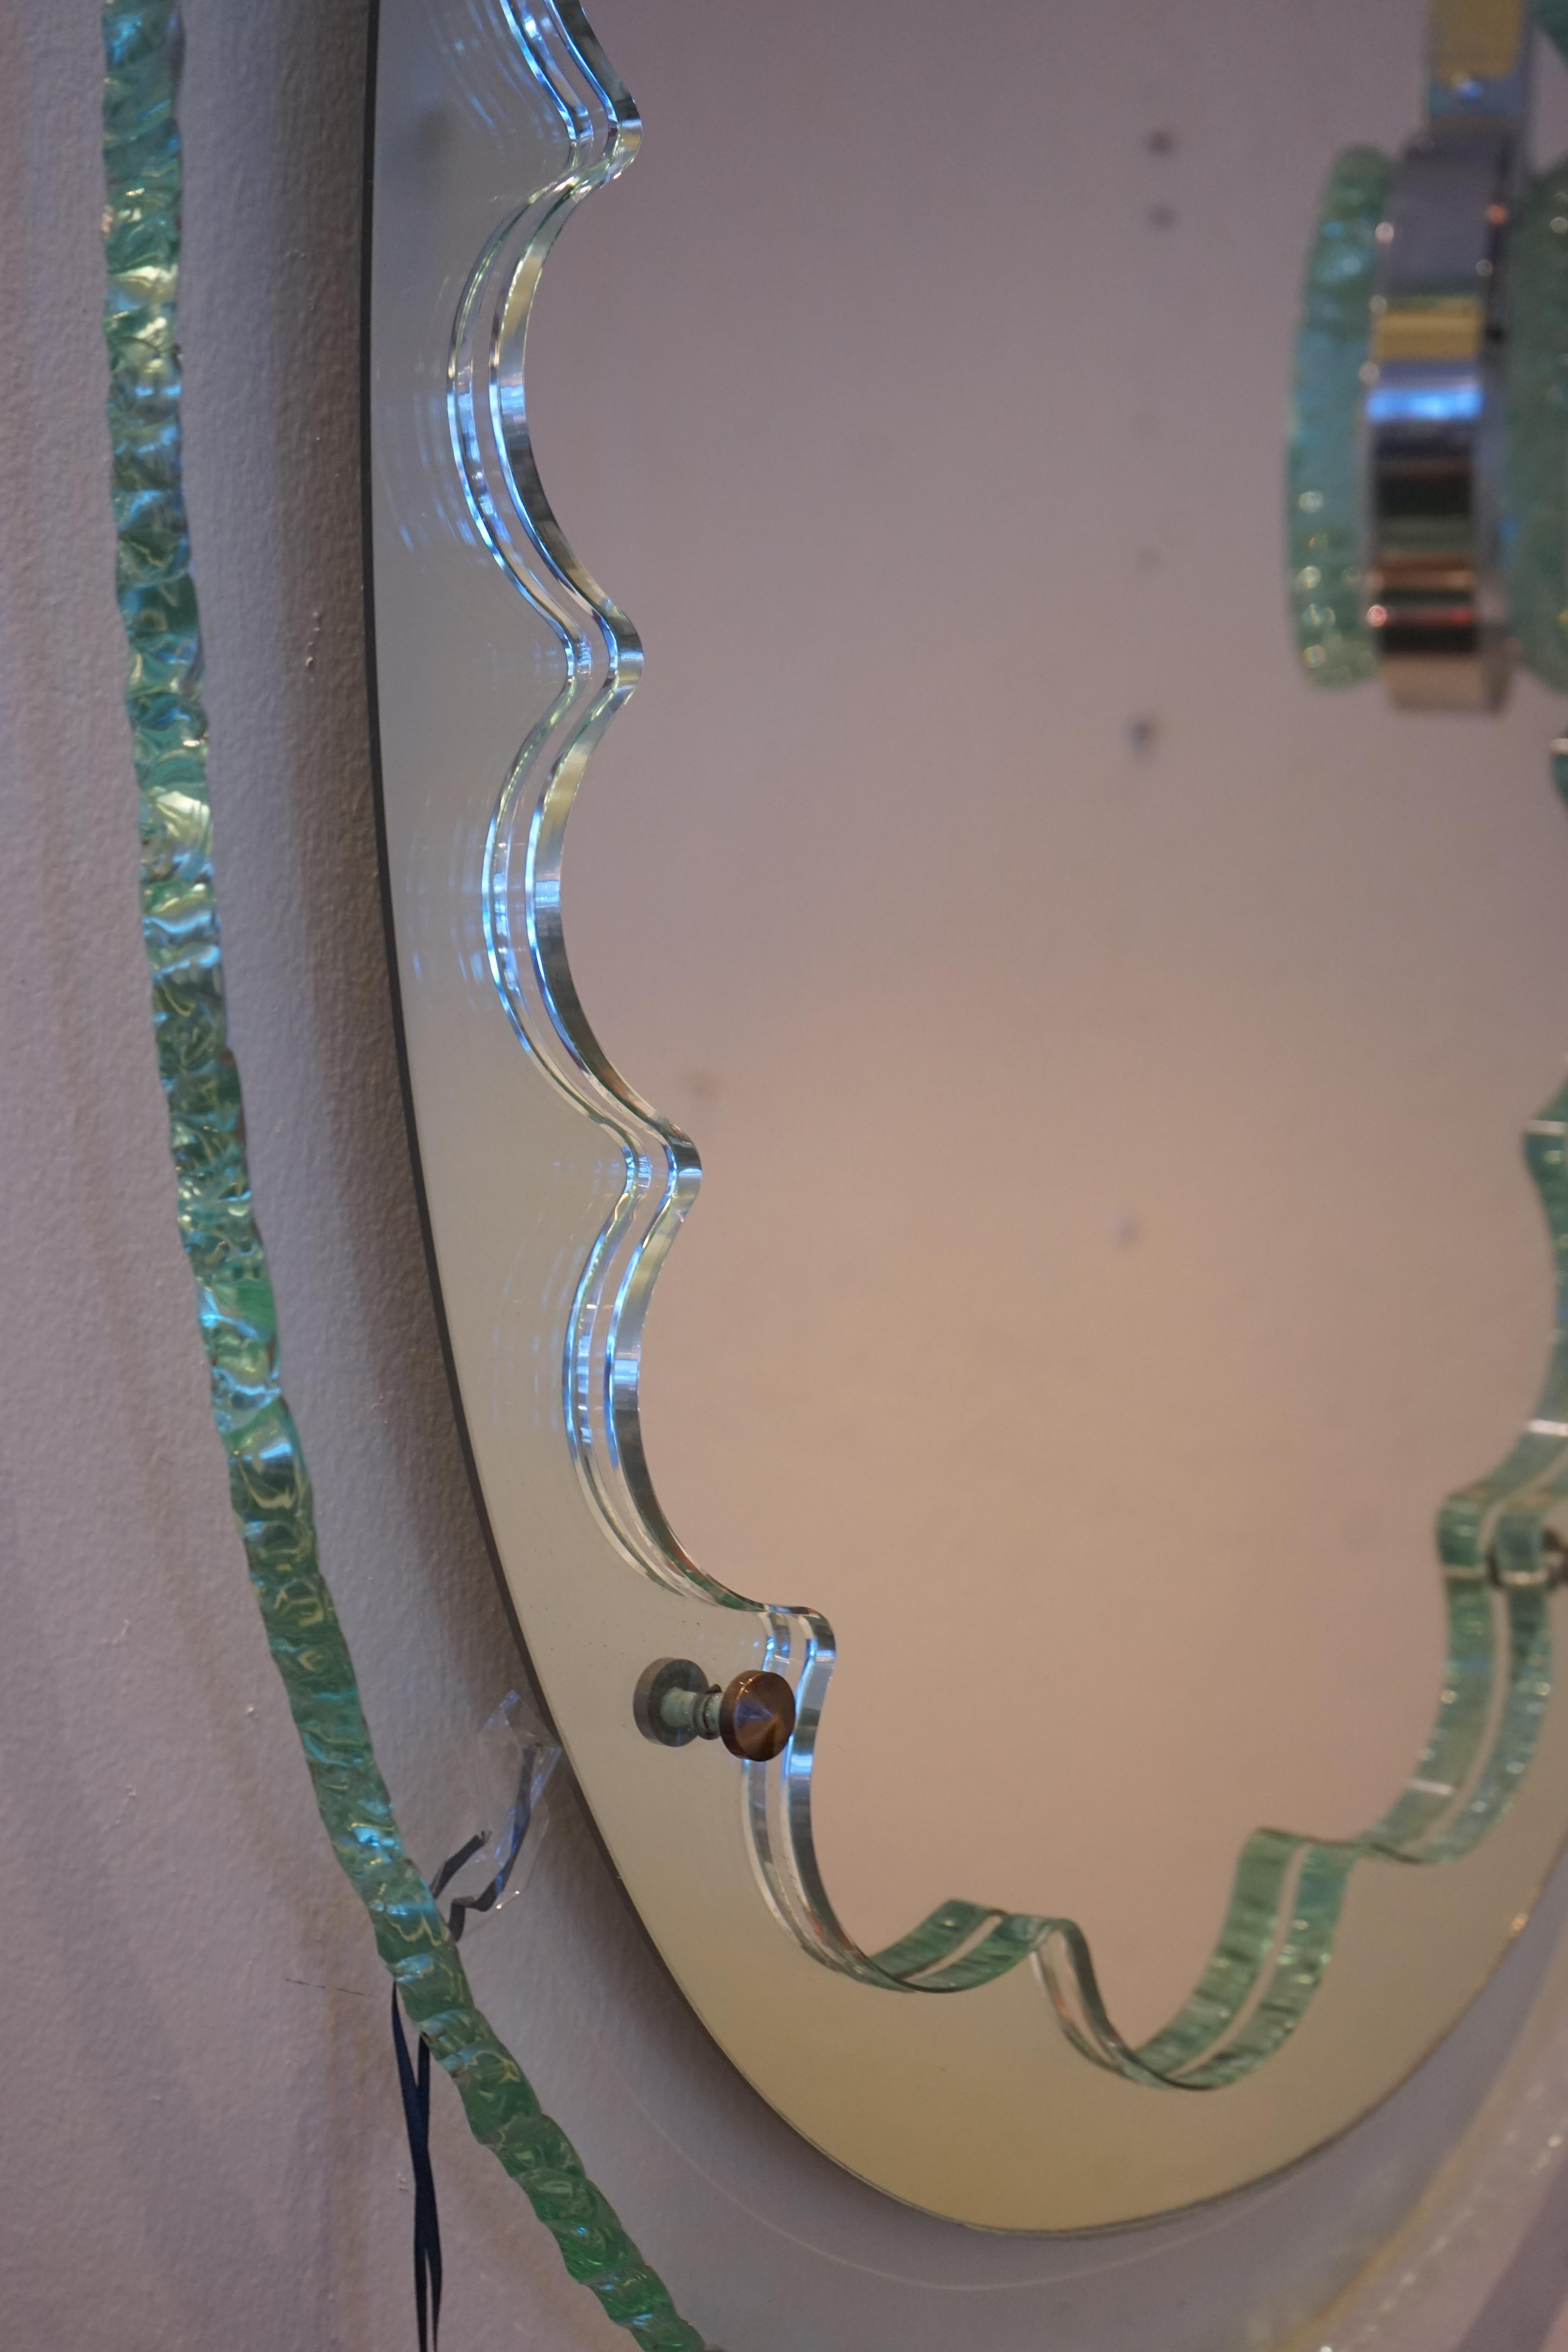 1950s French Max Ingrand inspired chiseled glass and scalloped design oval mirror.